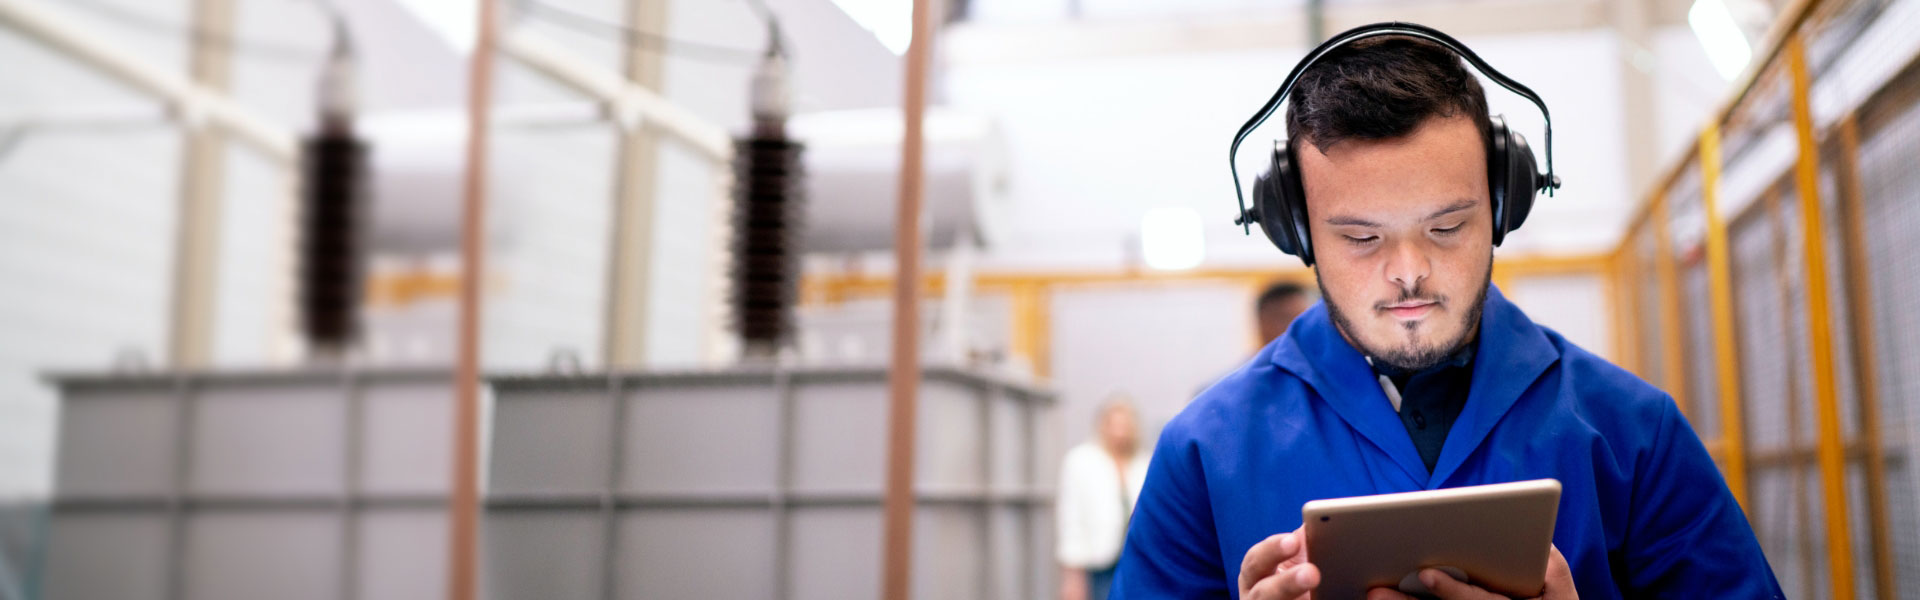 Young man with Down syndrome wearing a royal blue shirt and headphones stands in a warehouse while working on a tablet.